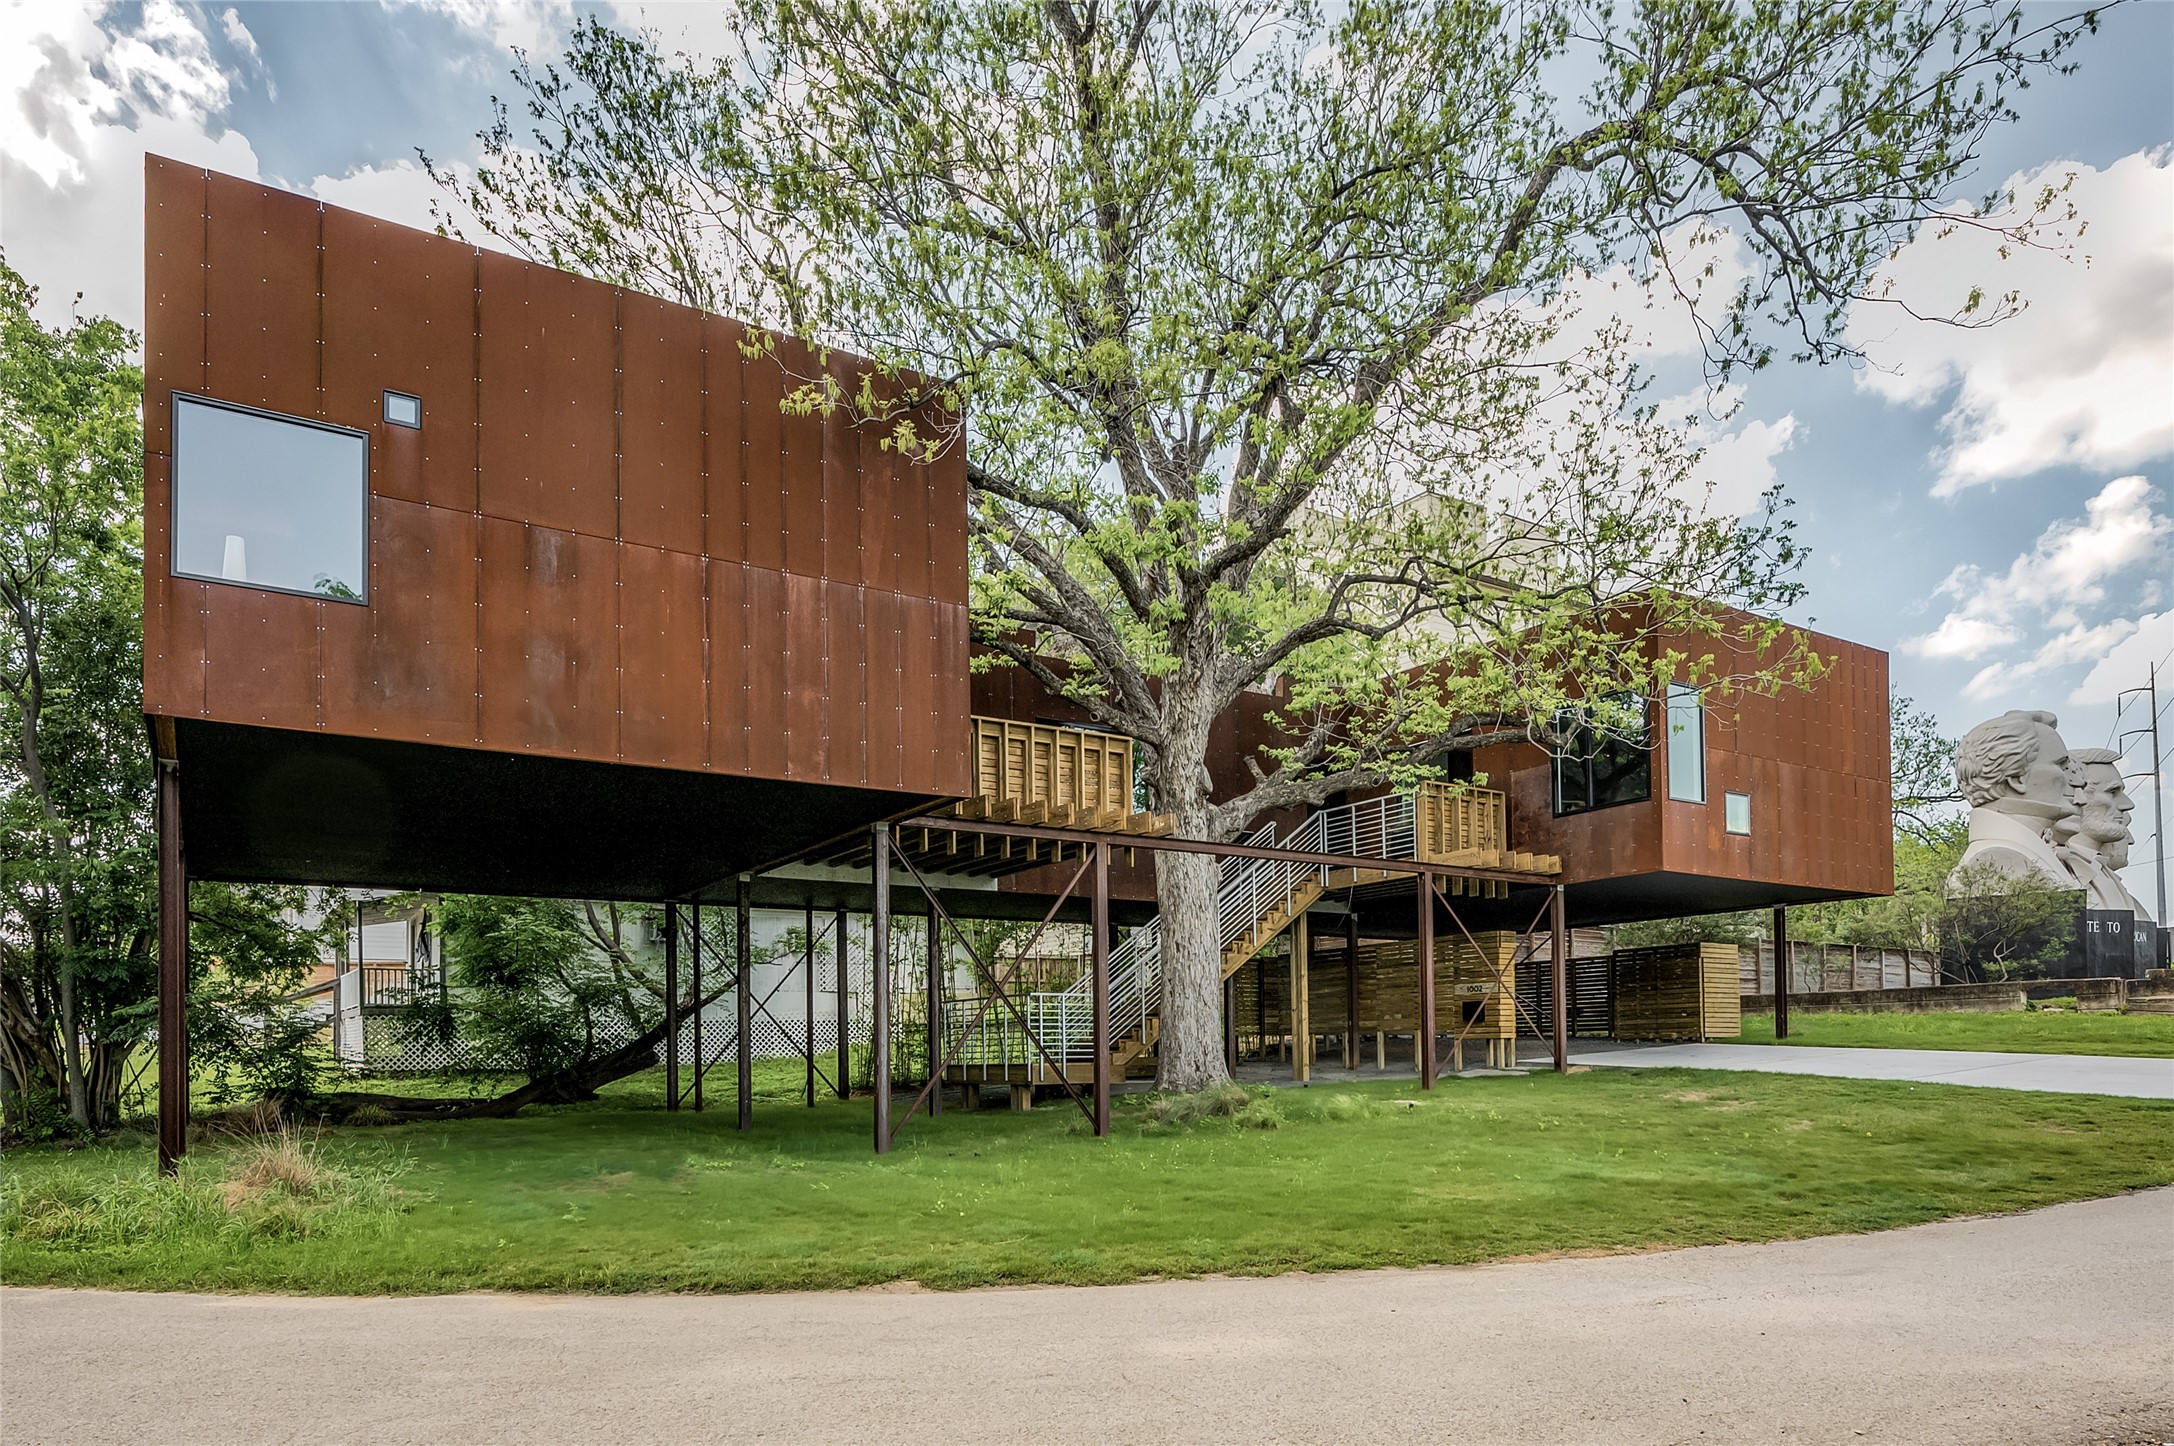 An urban treehouse wrapping a magnificent 200-year-old pecan tree, 1002 Edwards is architecture as art, designed and built by Scott Strasser.